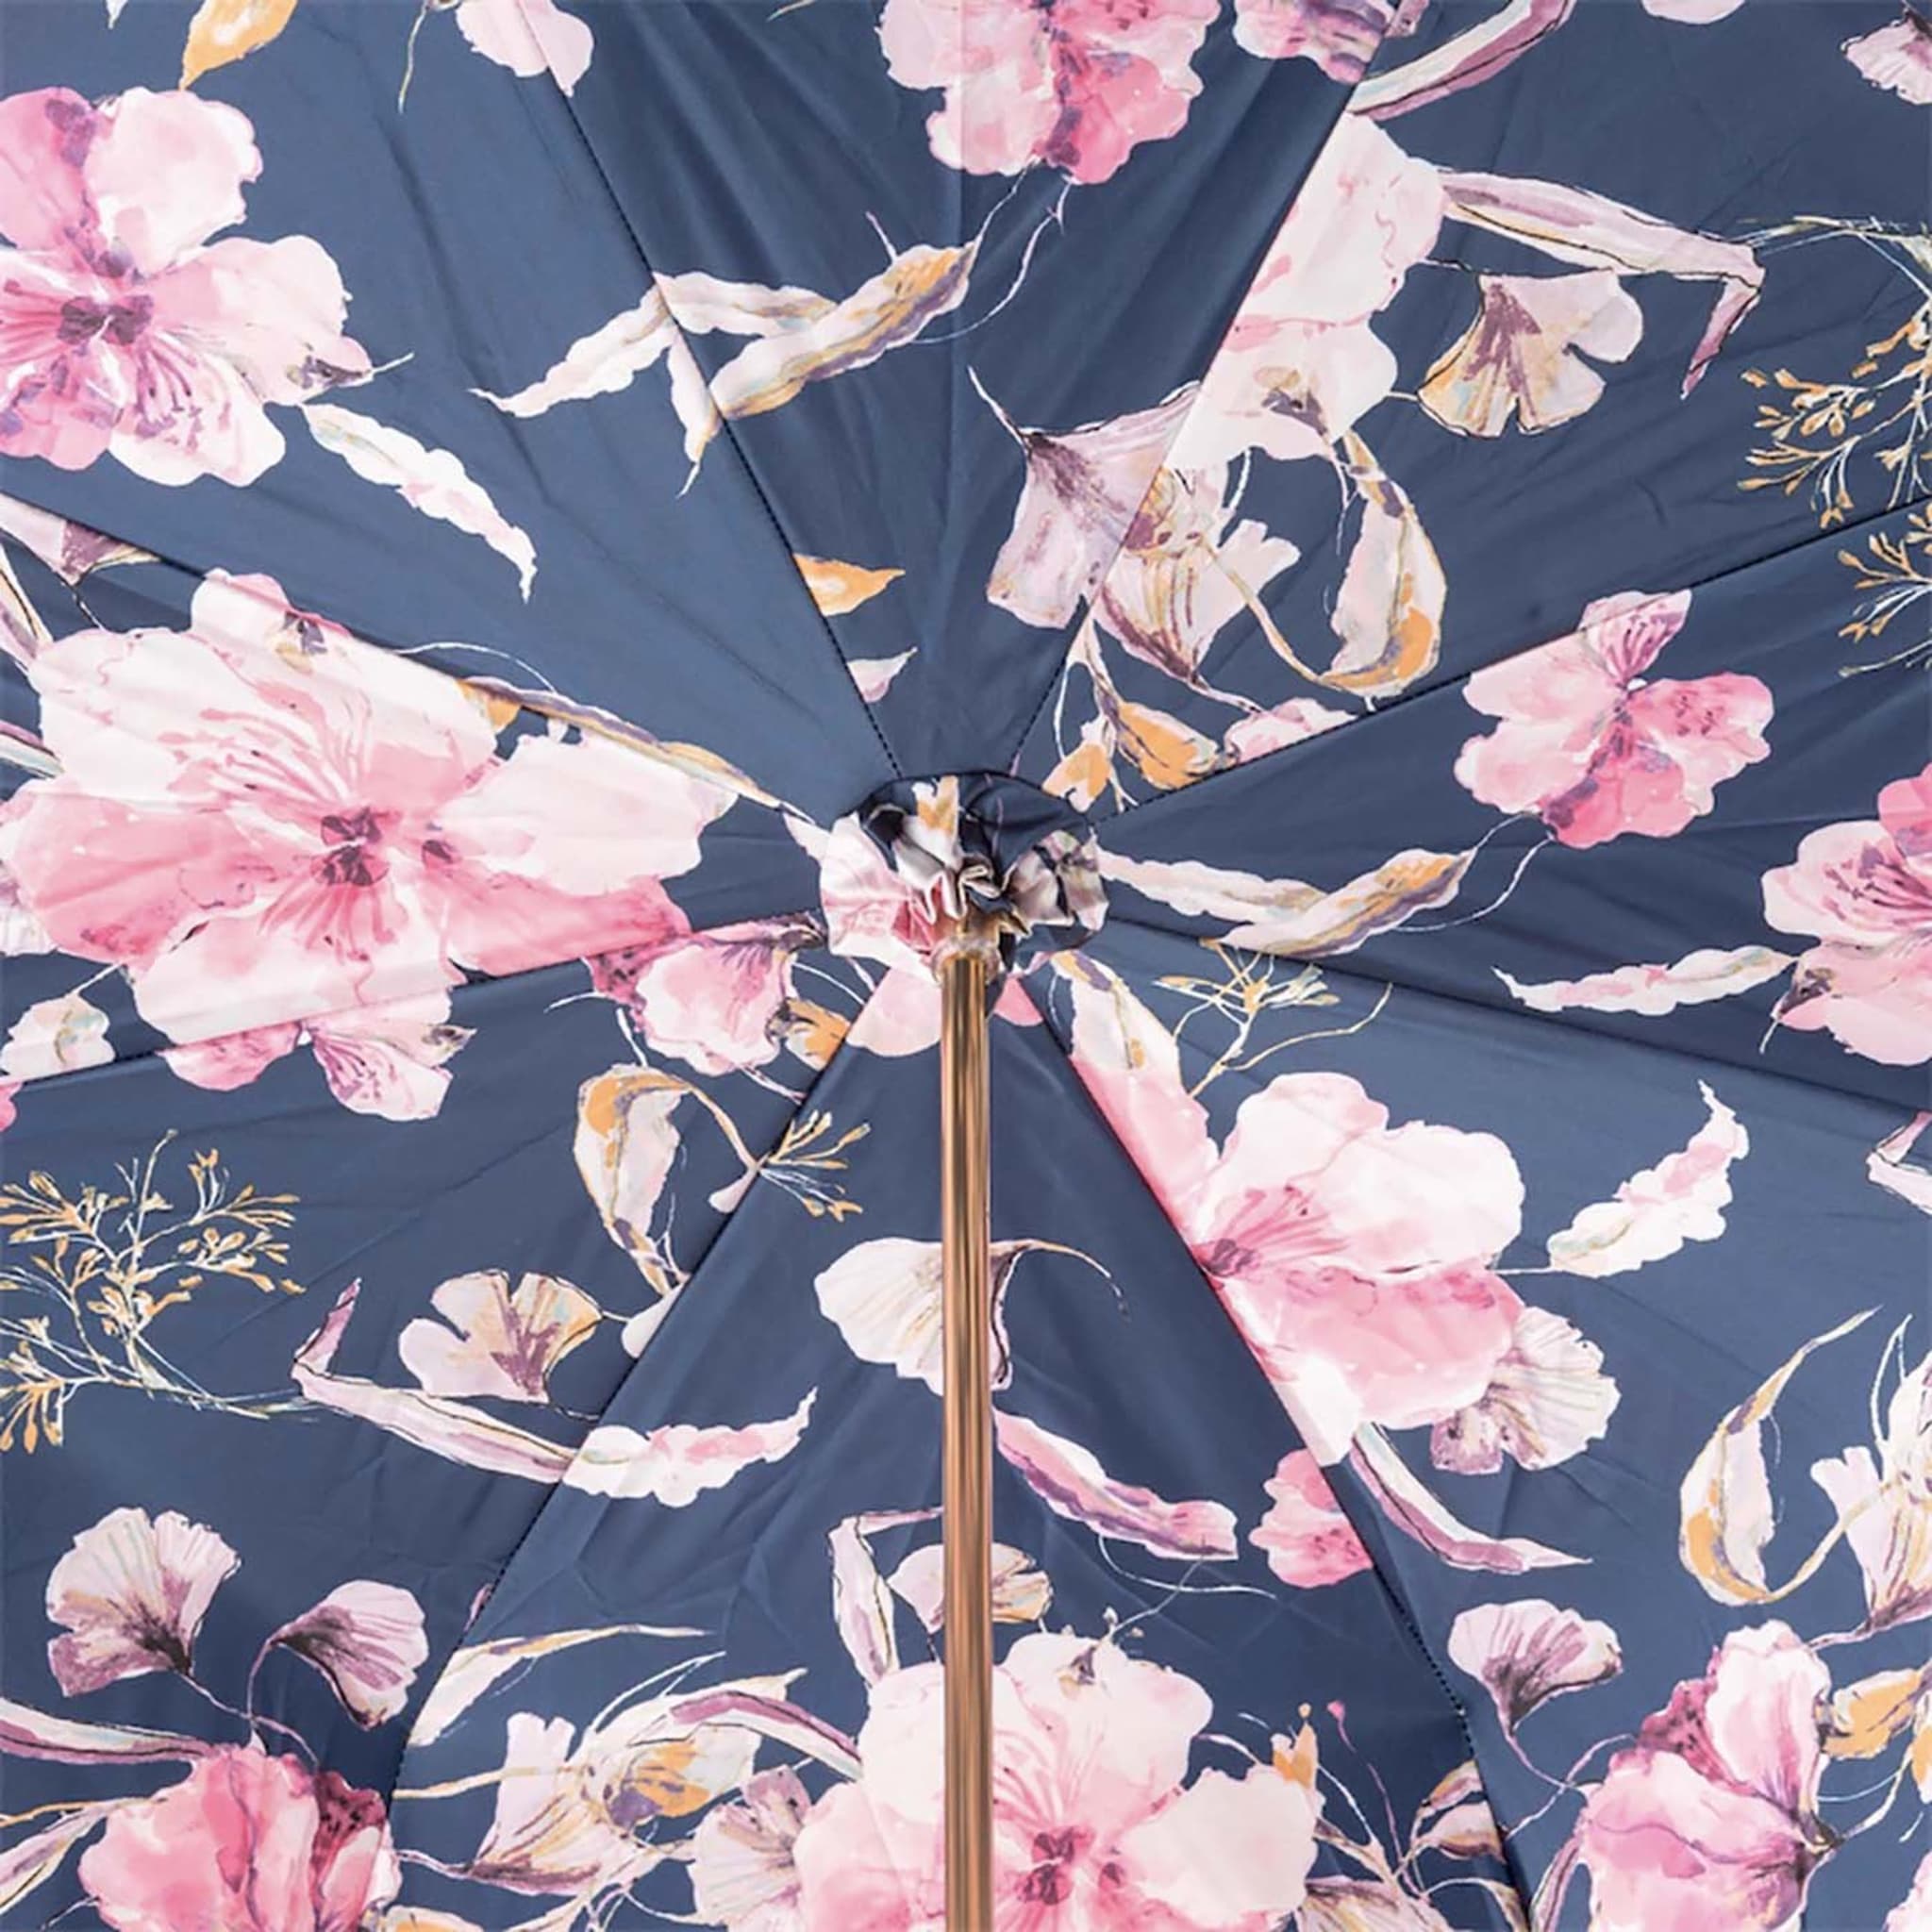 Pink Umbrella with Flowers - Alternative view 4